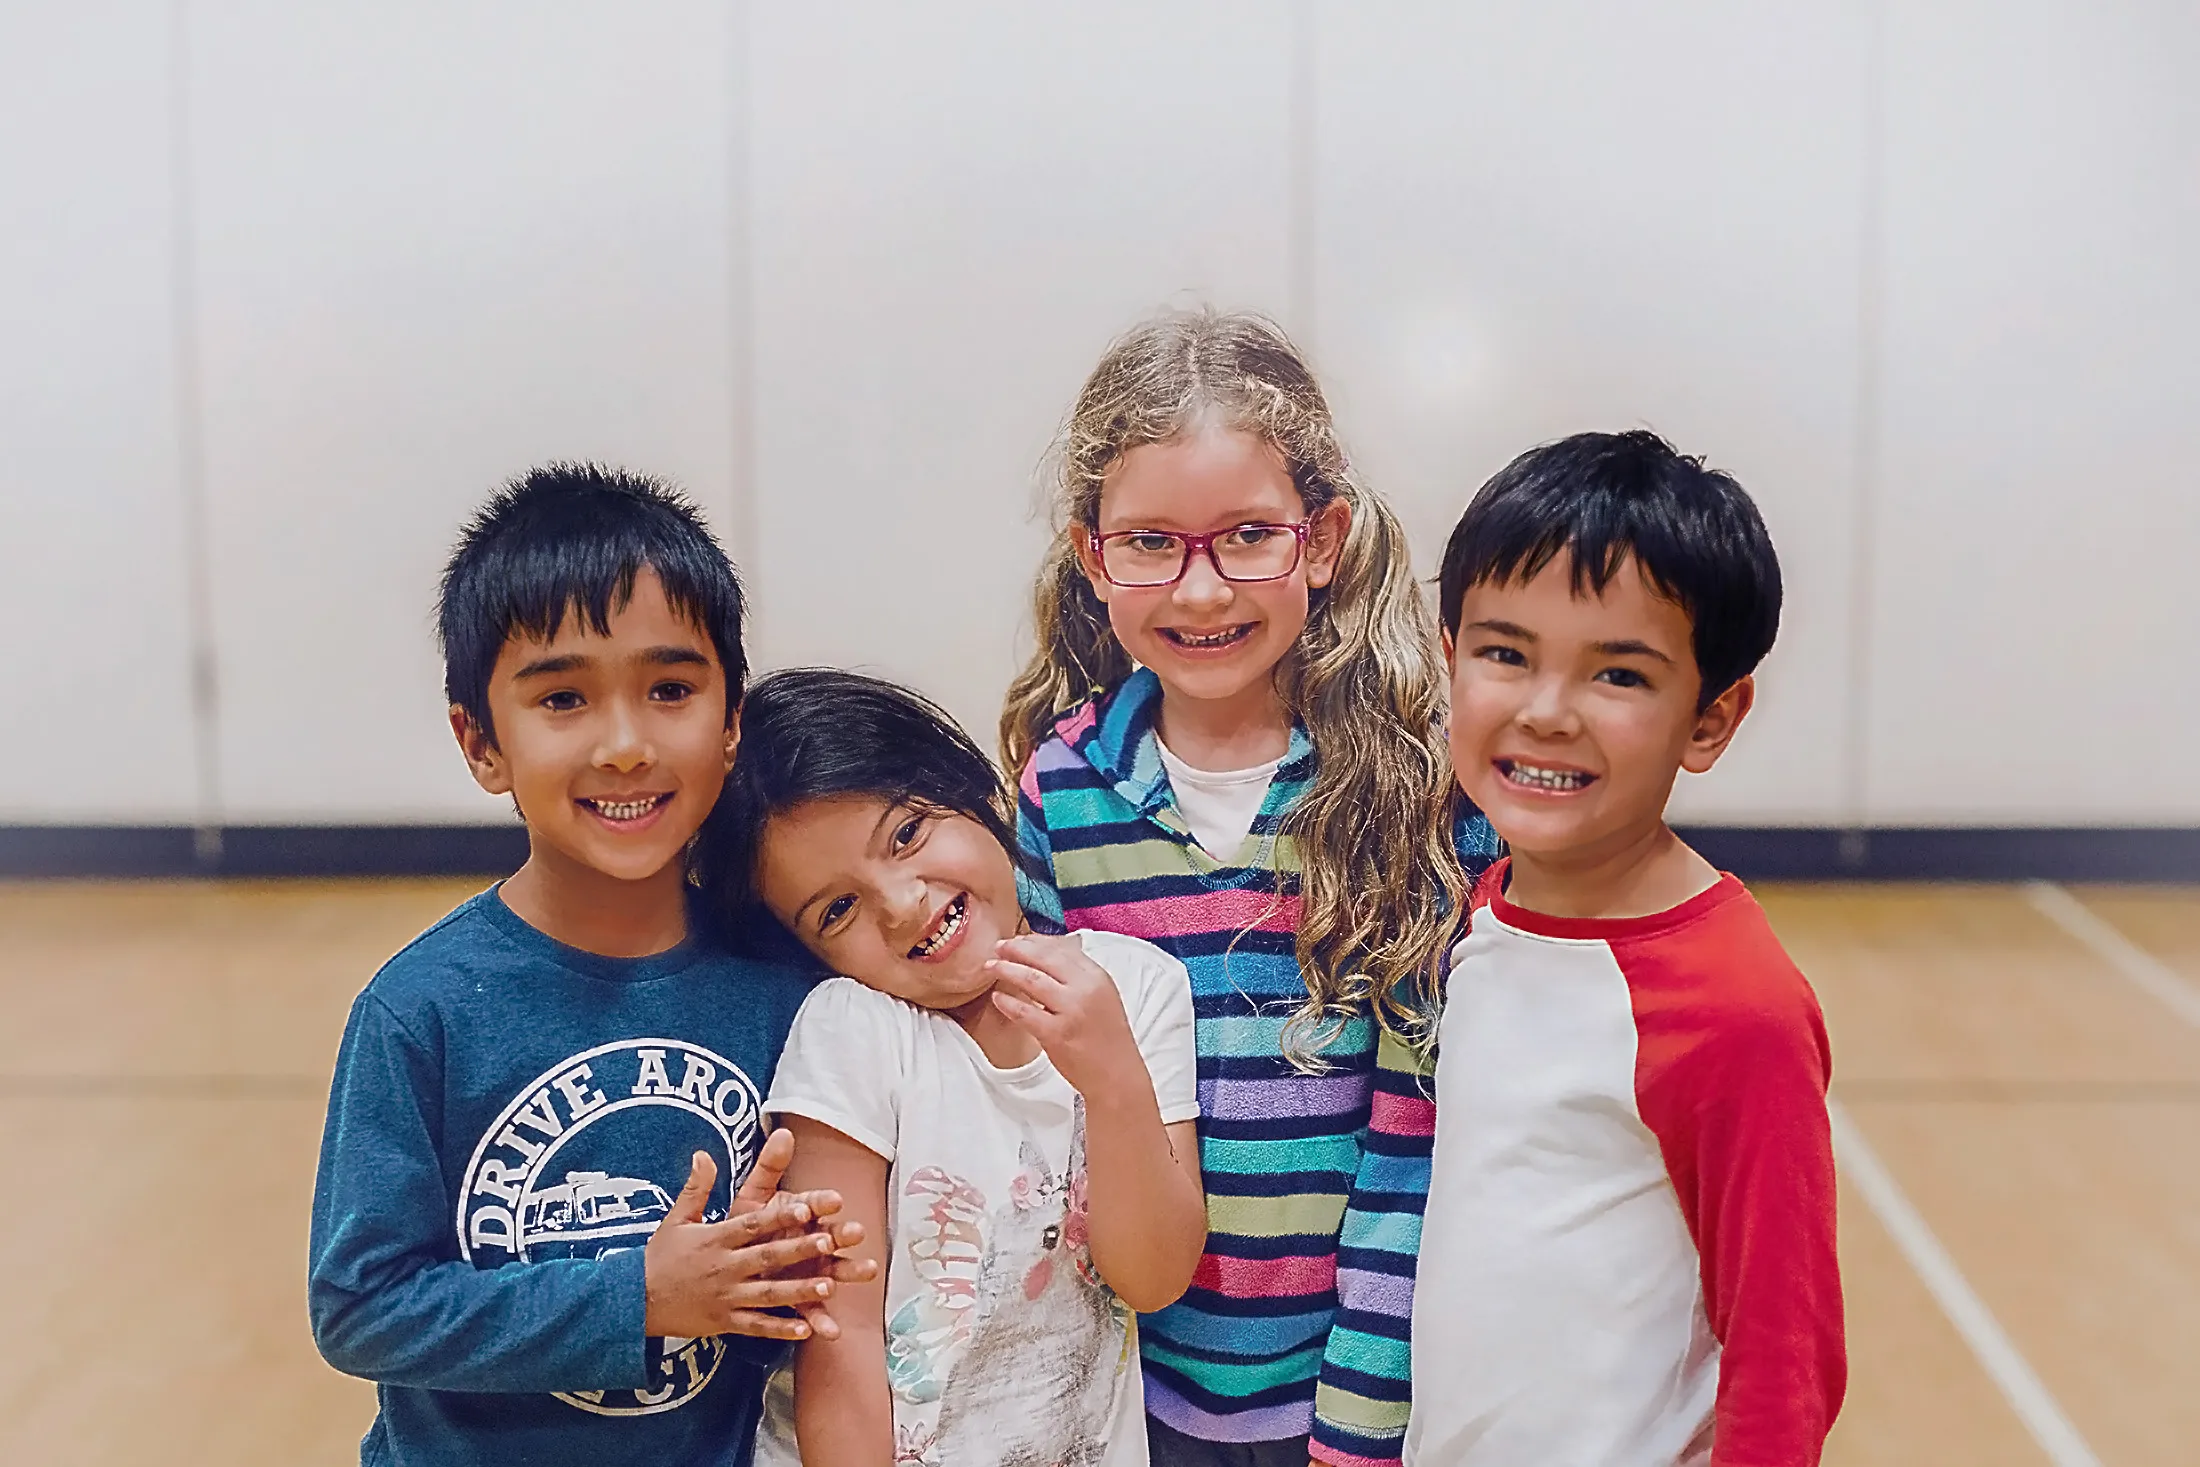 image of four kids smiling together in gymnasium